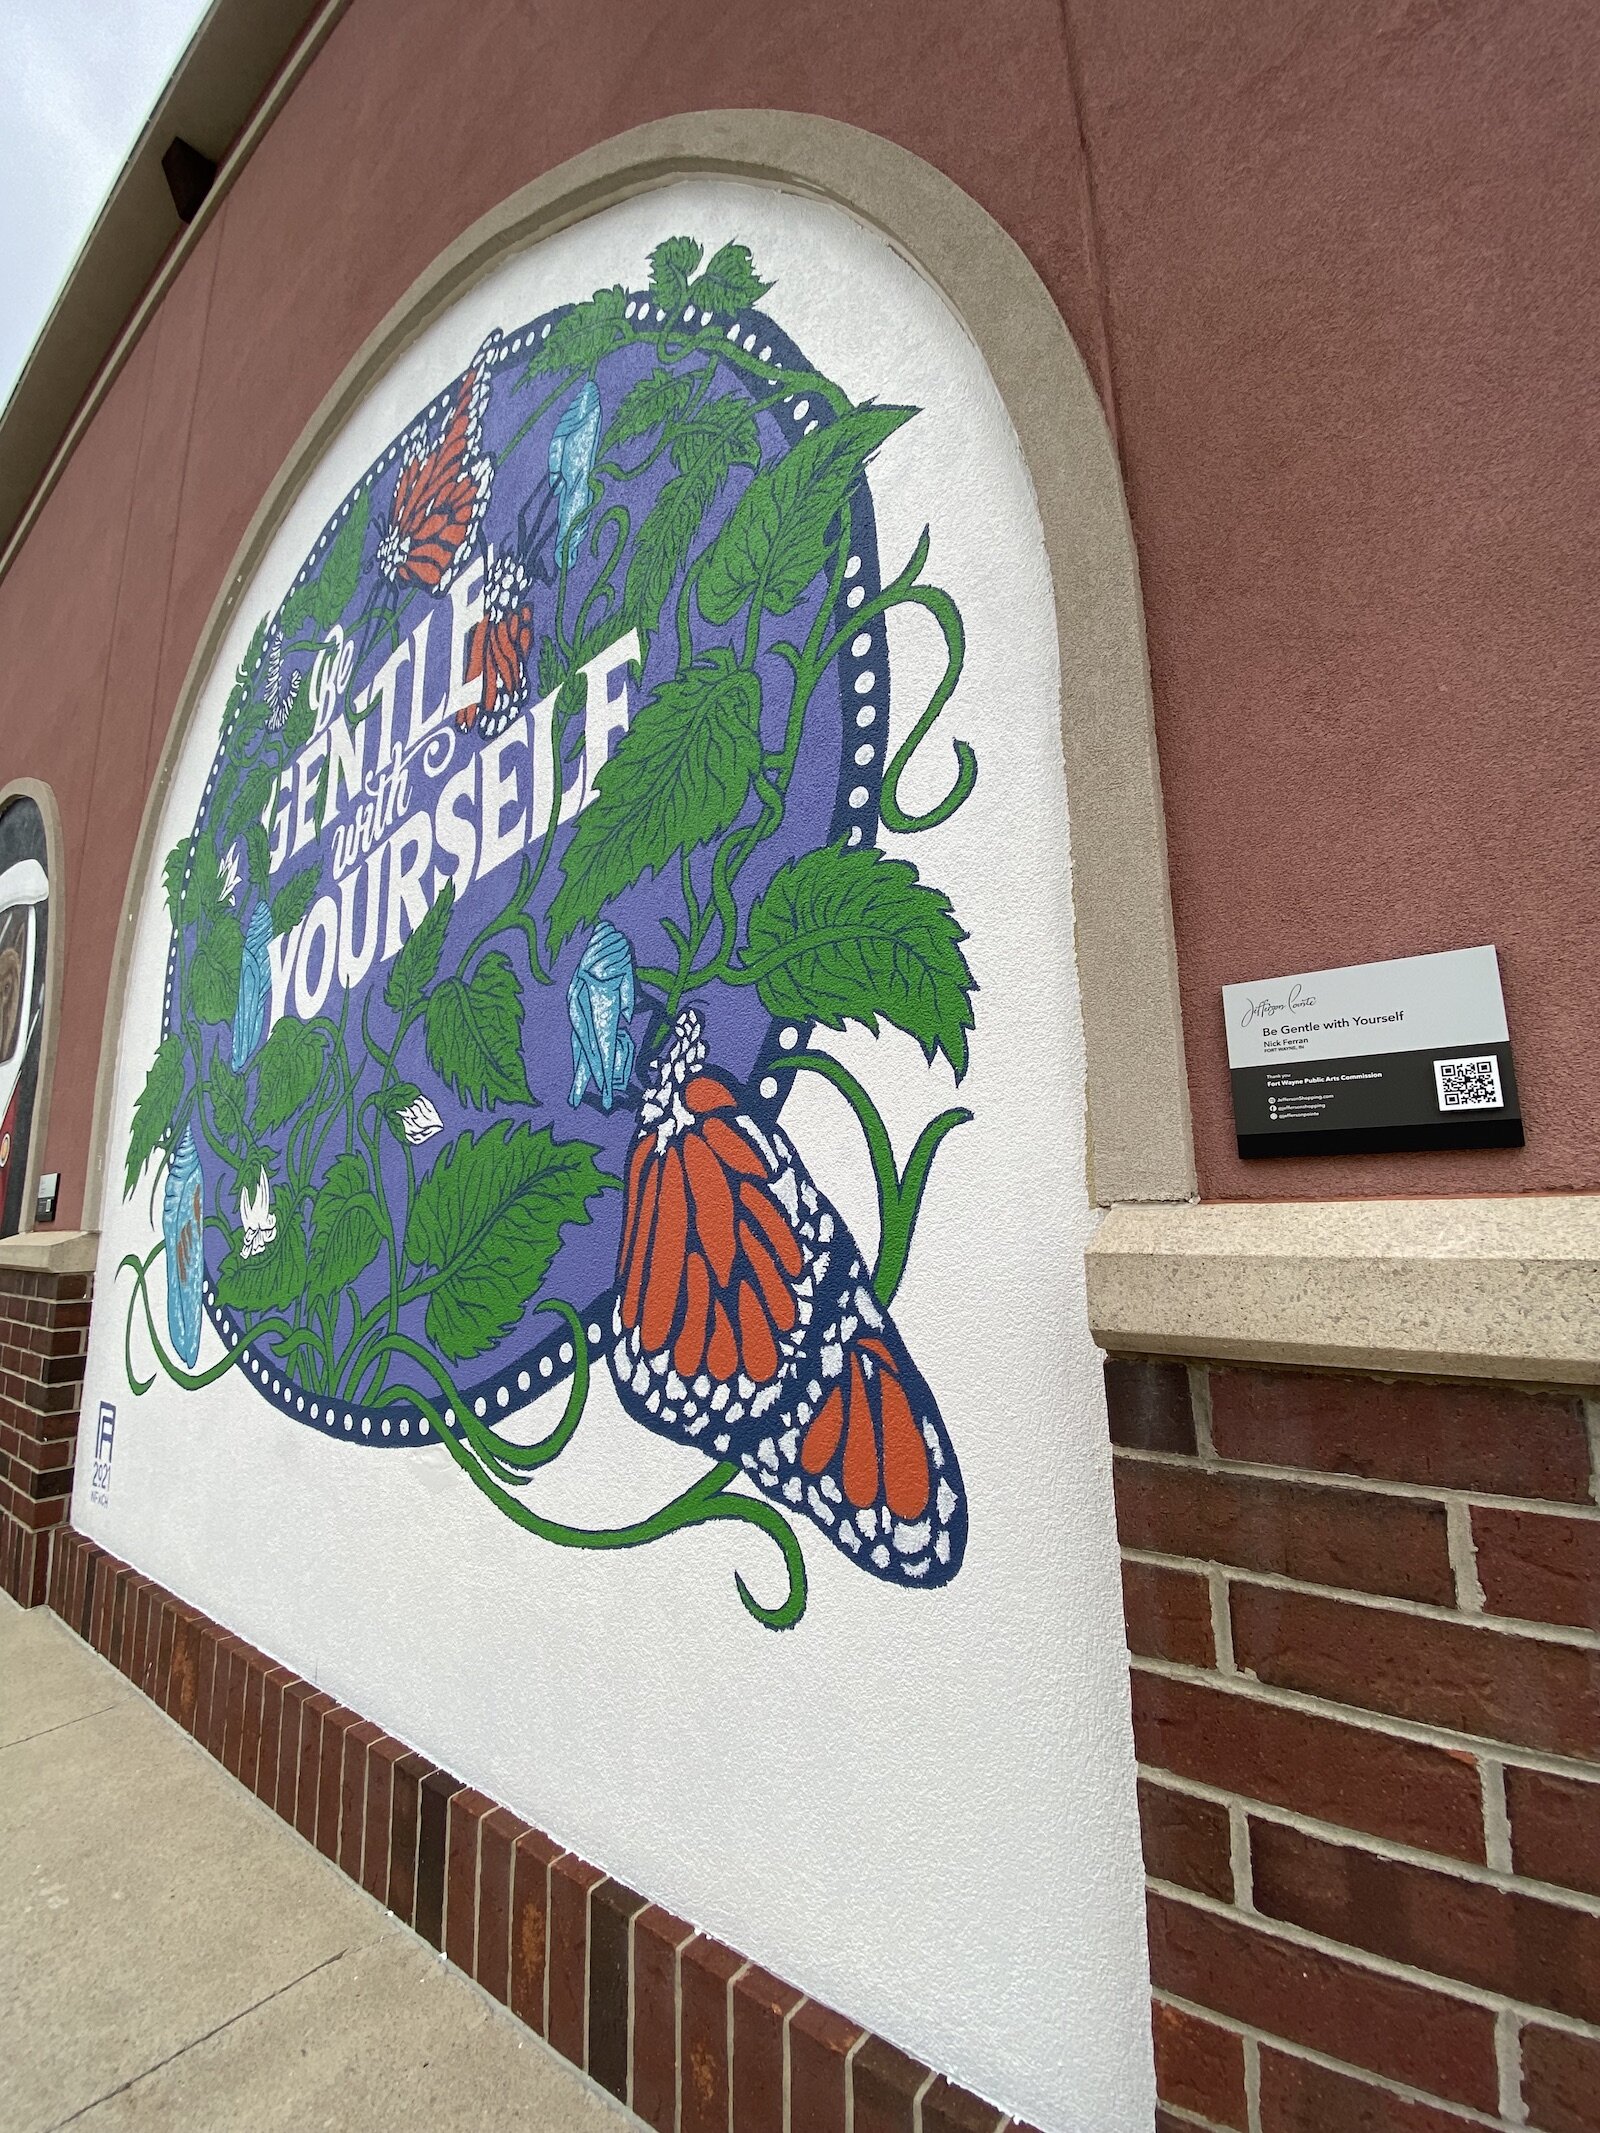 There's a series of new murals at Jefferson Pointe created by Fort Wayne artists.